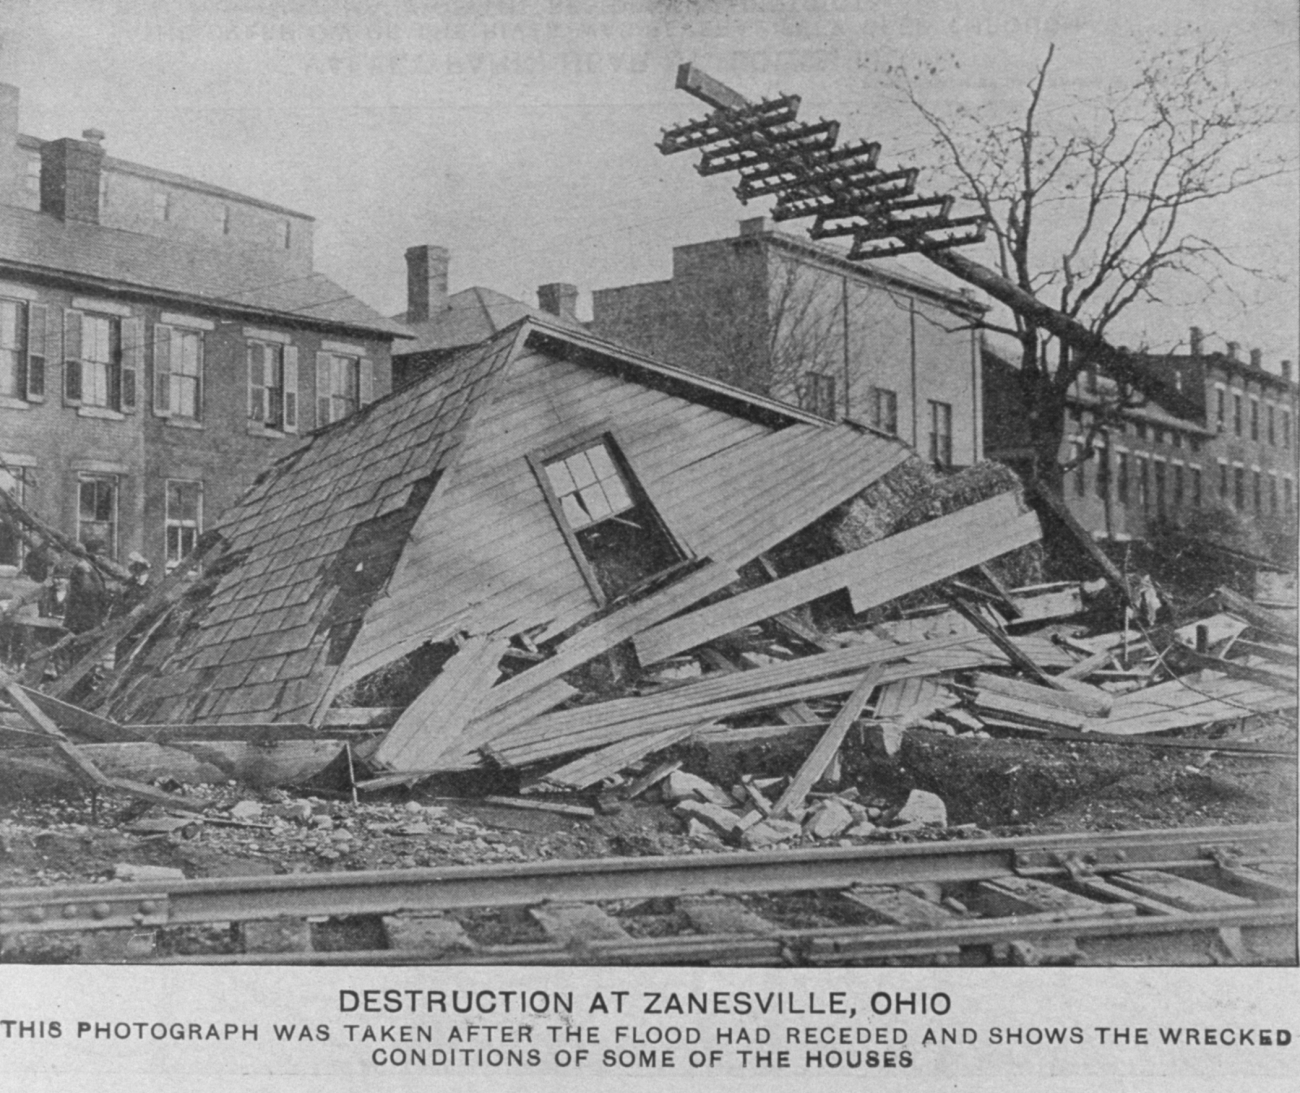 House destroyed by the flood at Zanesville